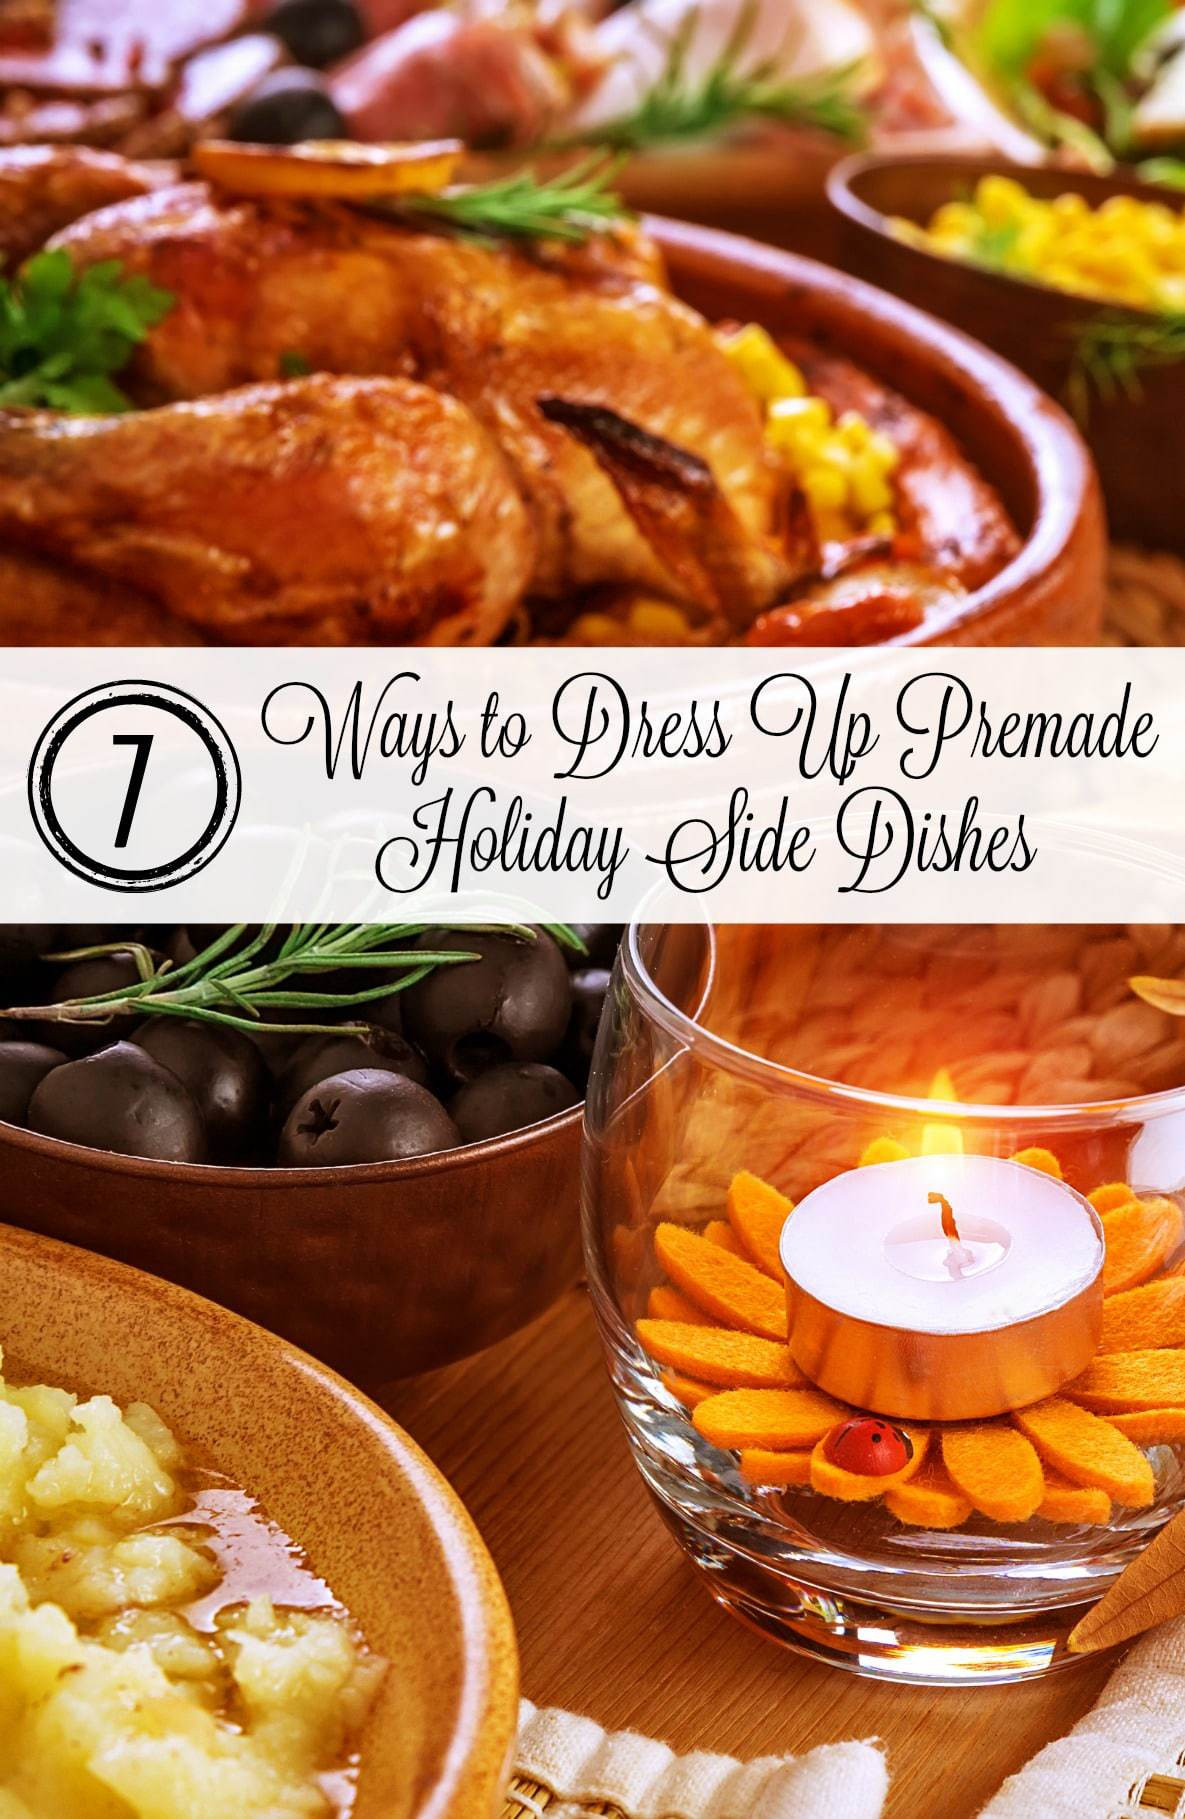 Premade Christmas Dinner
 7 Ways to Dress Up Premade Holiday Side Dishes DinDin